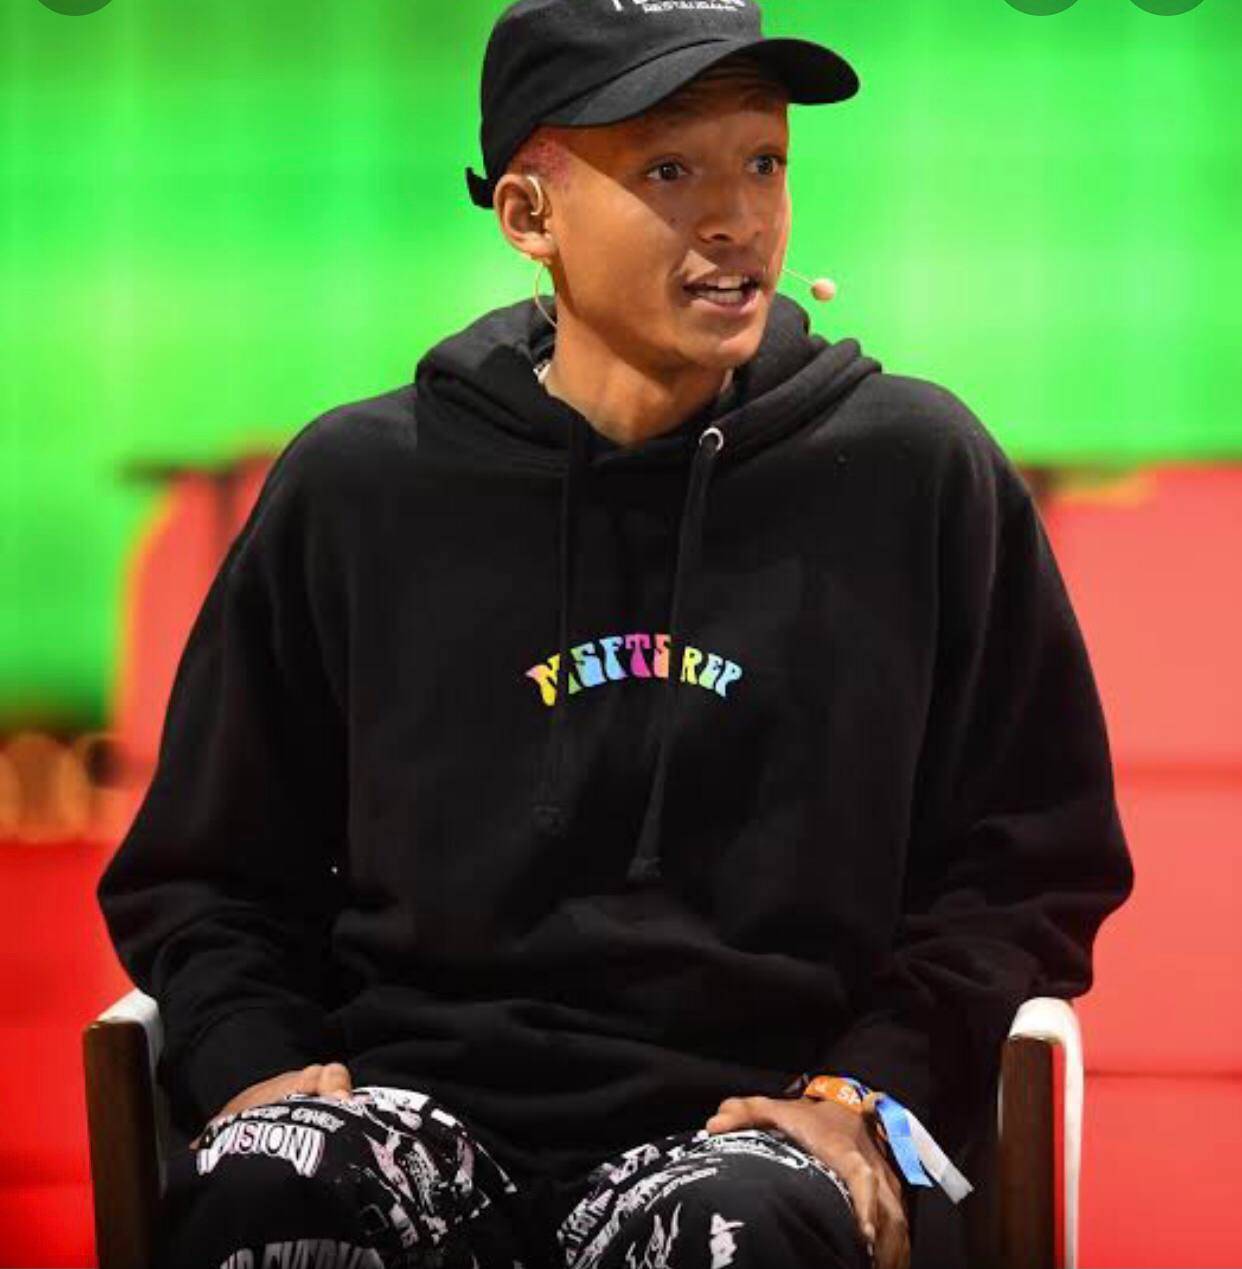 Jaden Smith shows off physique after health intervention